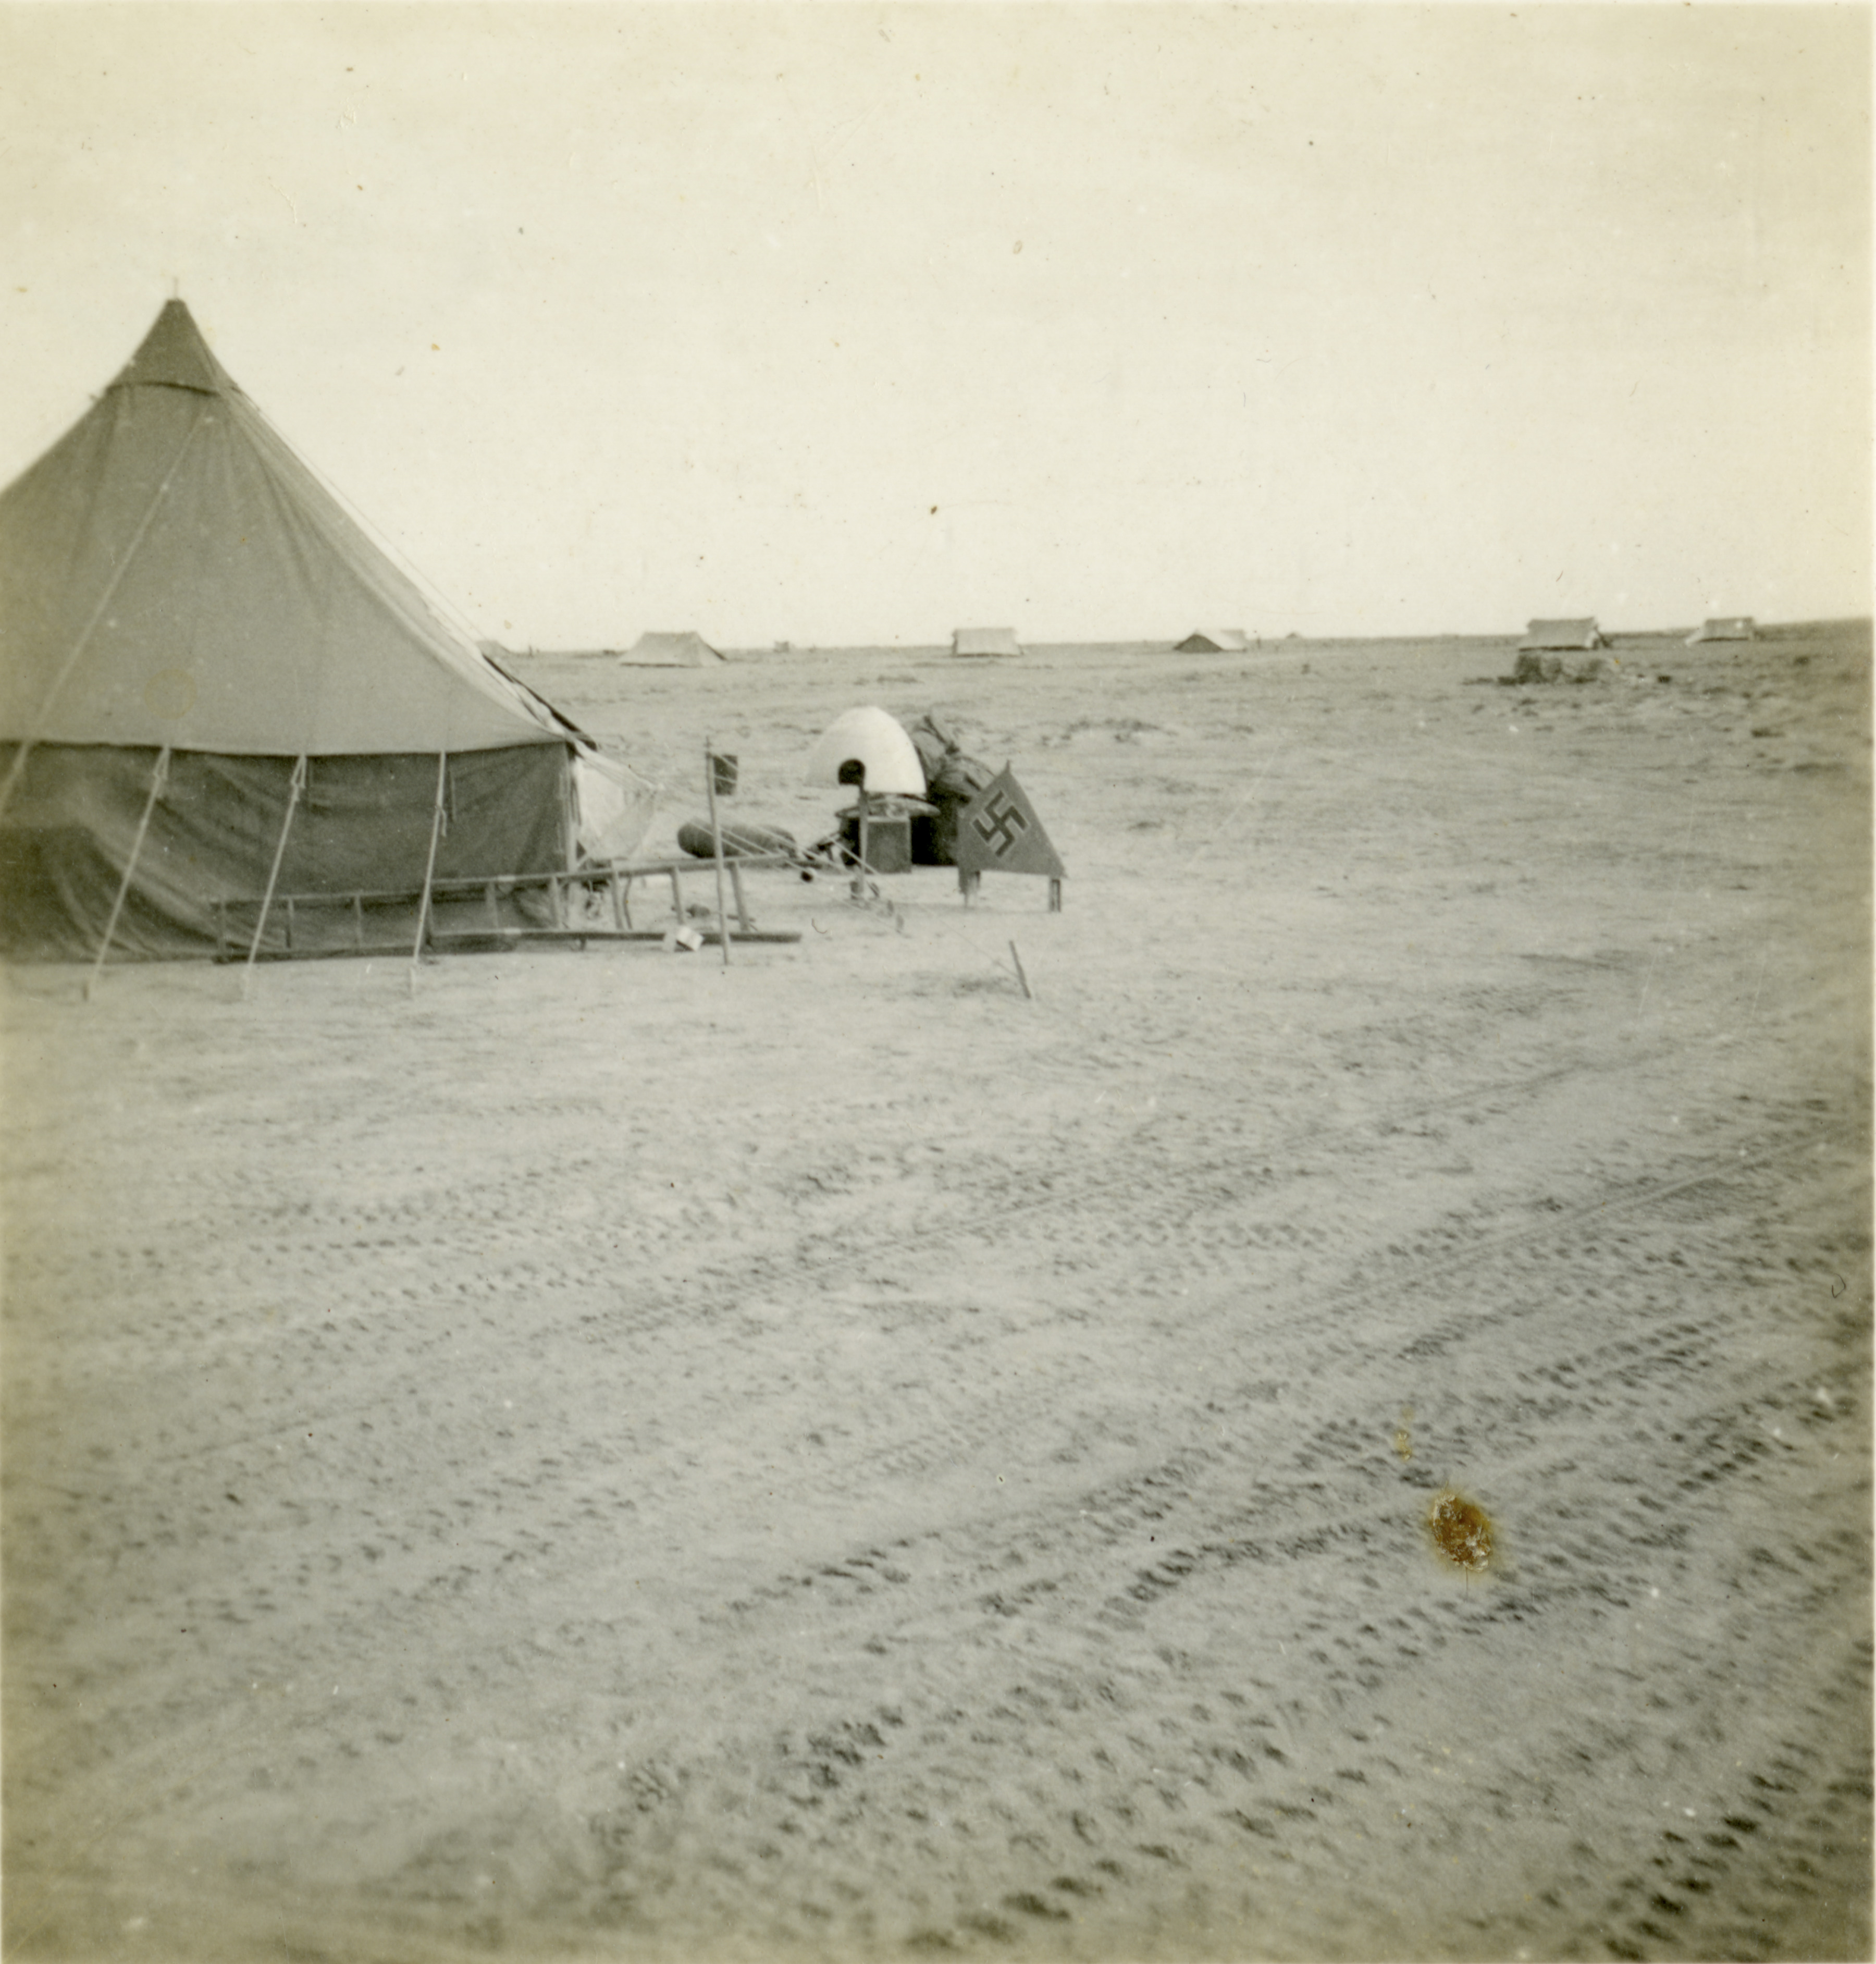 Tent at a military camp in North Africa, 1942-43